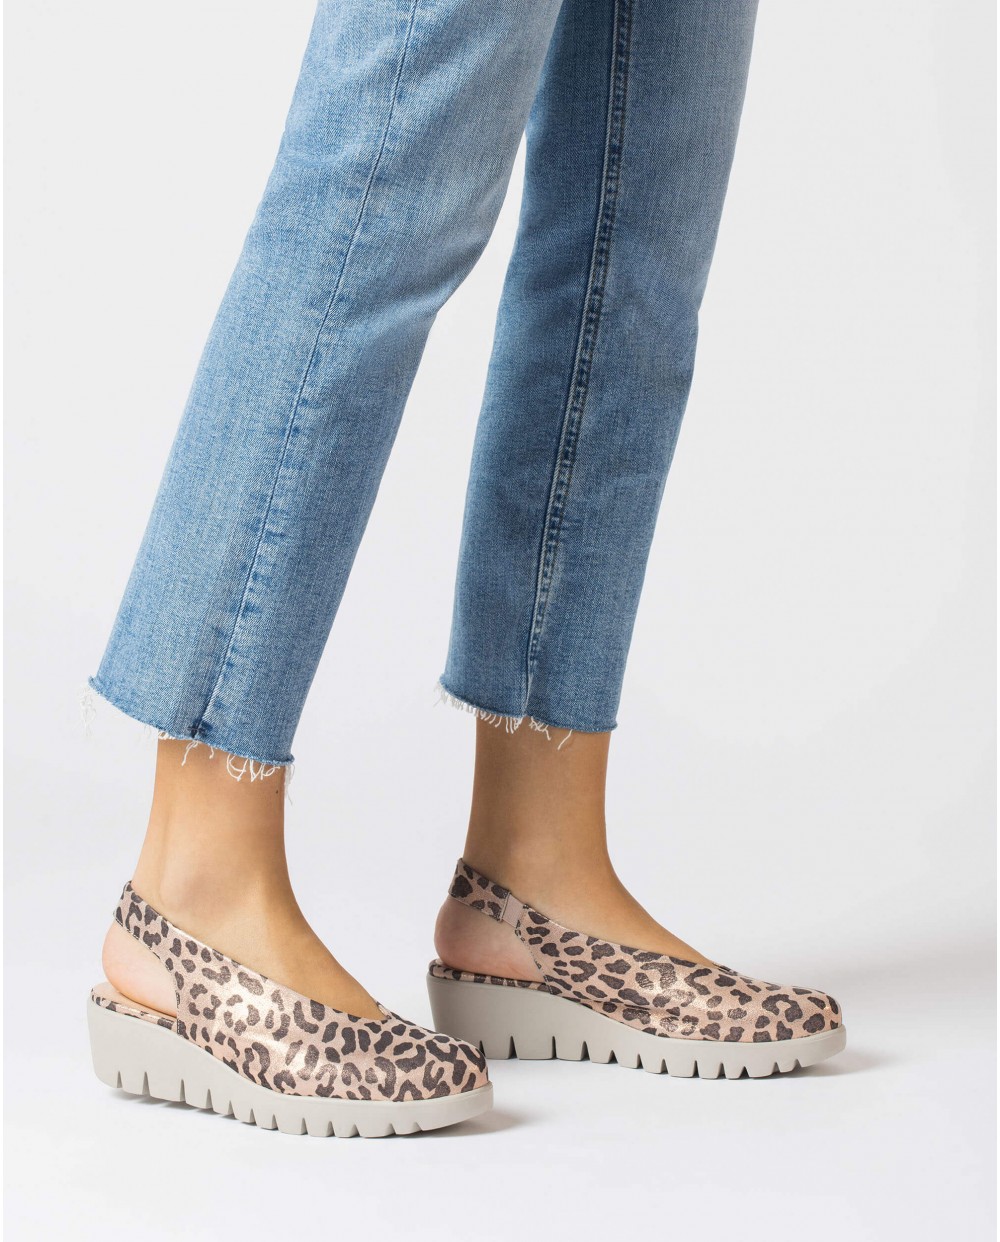 Wonders-Outlet-animal print leather loafer mule